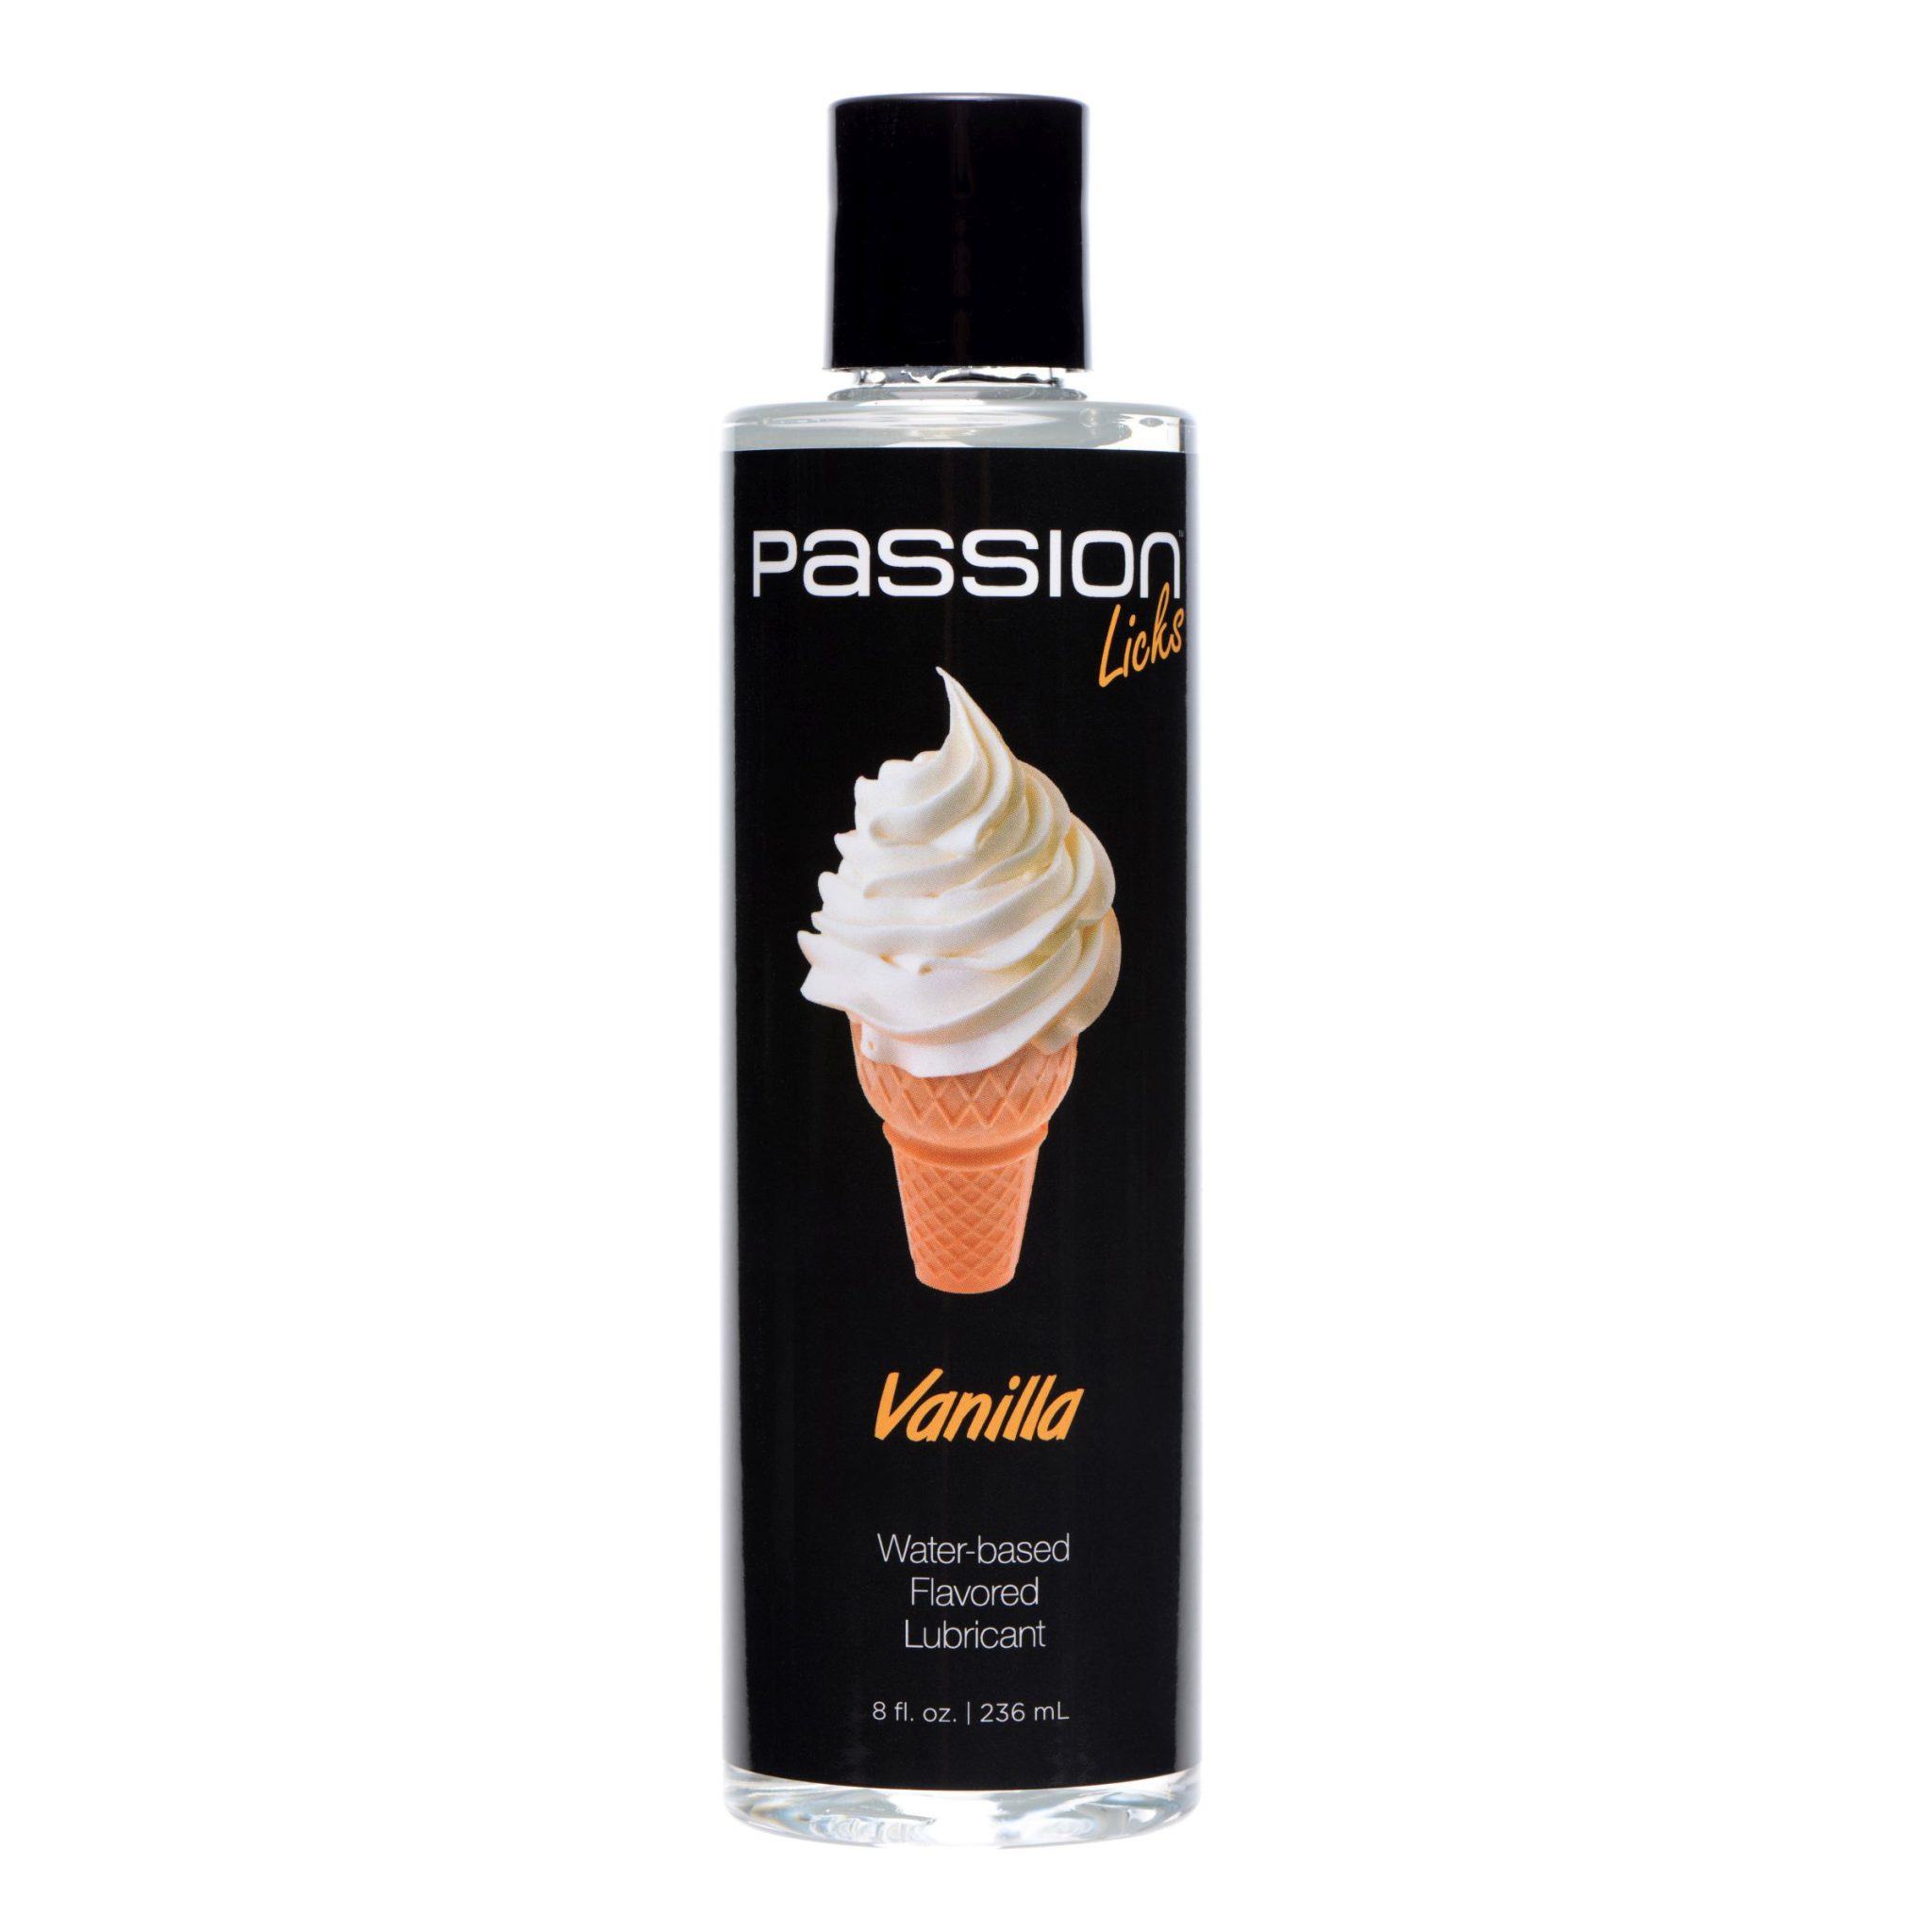 Passion Licks Vanilla Water Based Flavored Lubricant – 8 oz